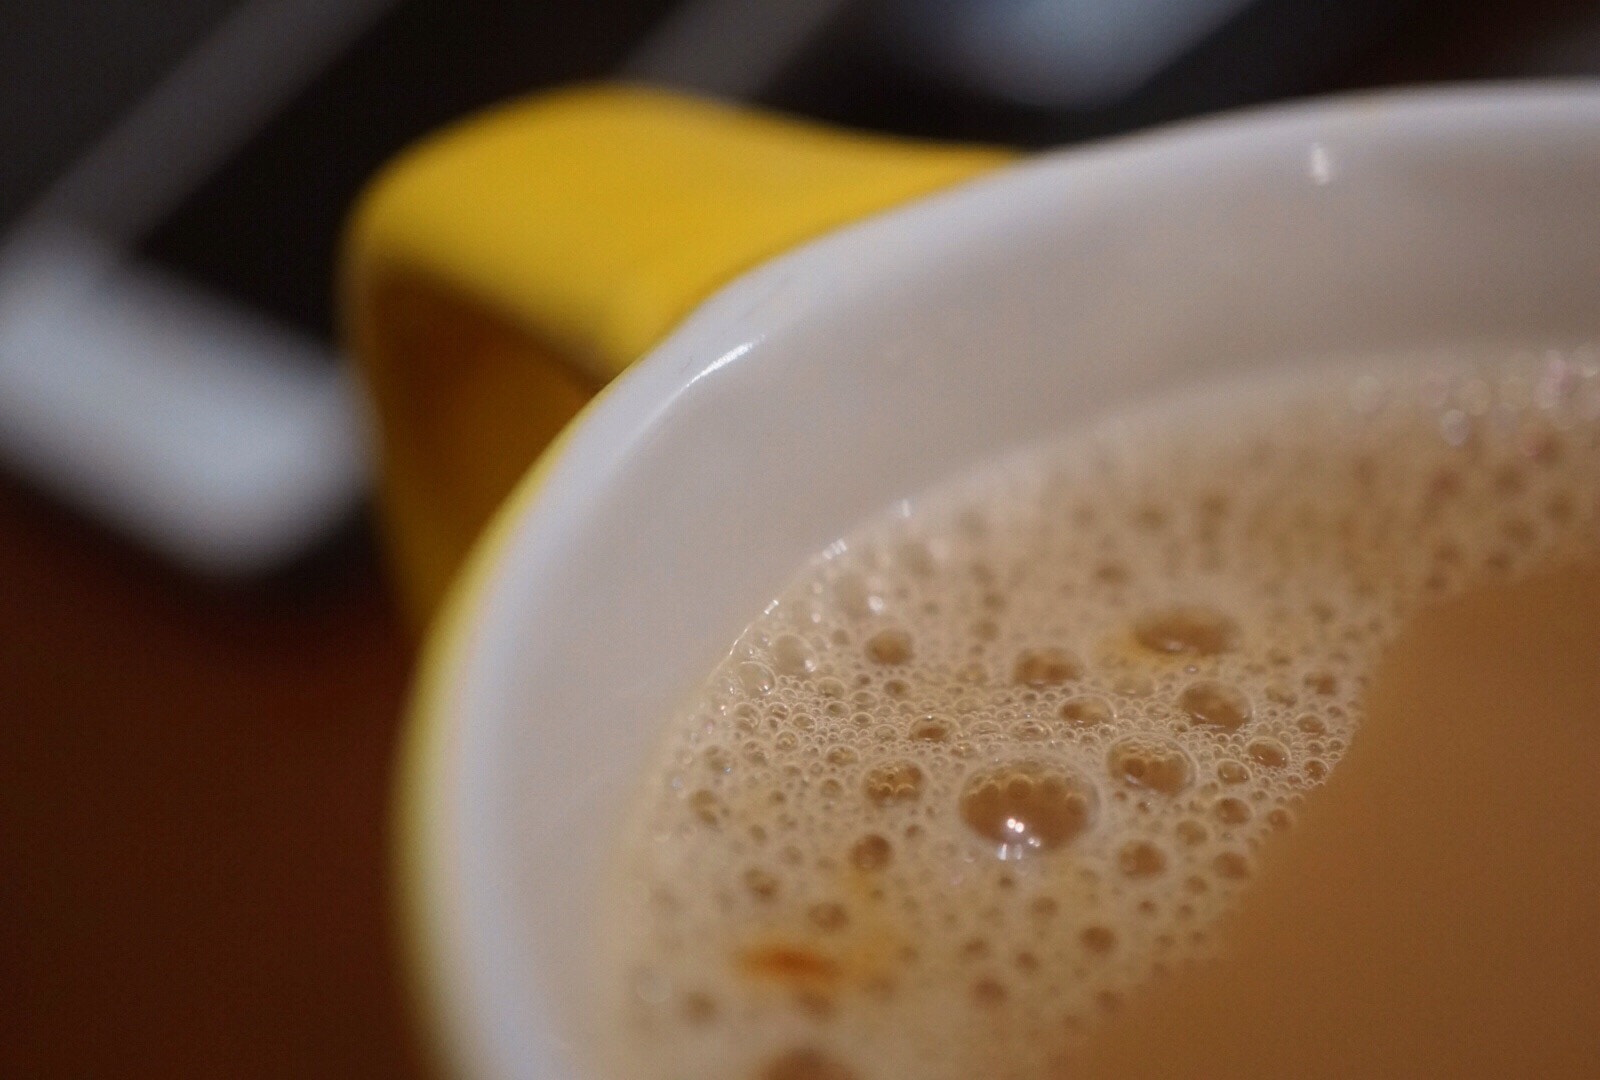 Sony a5100 + Sony E 30mm F3.5 sample photo. At night, drink a cup of coffee, see if they might photography